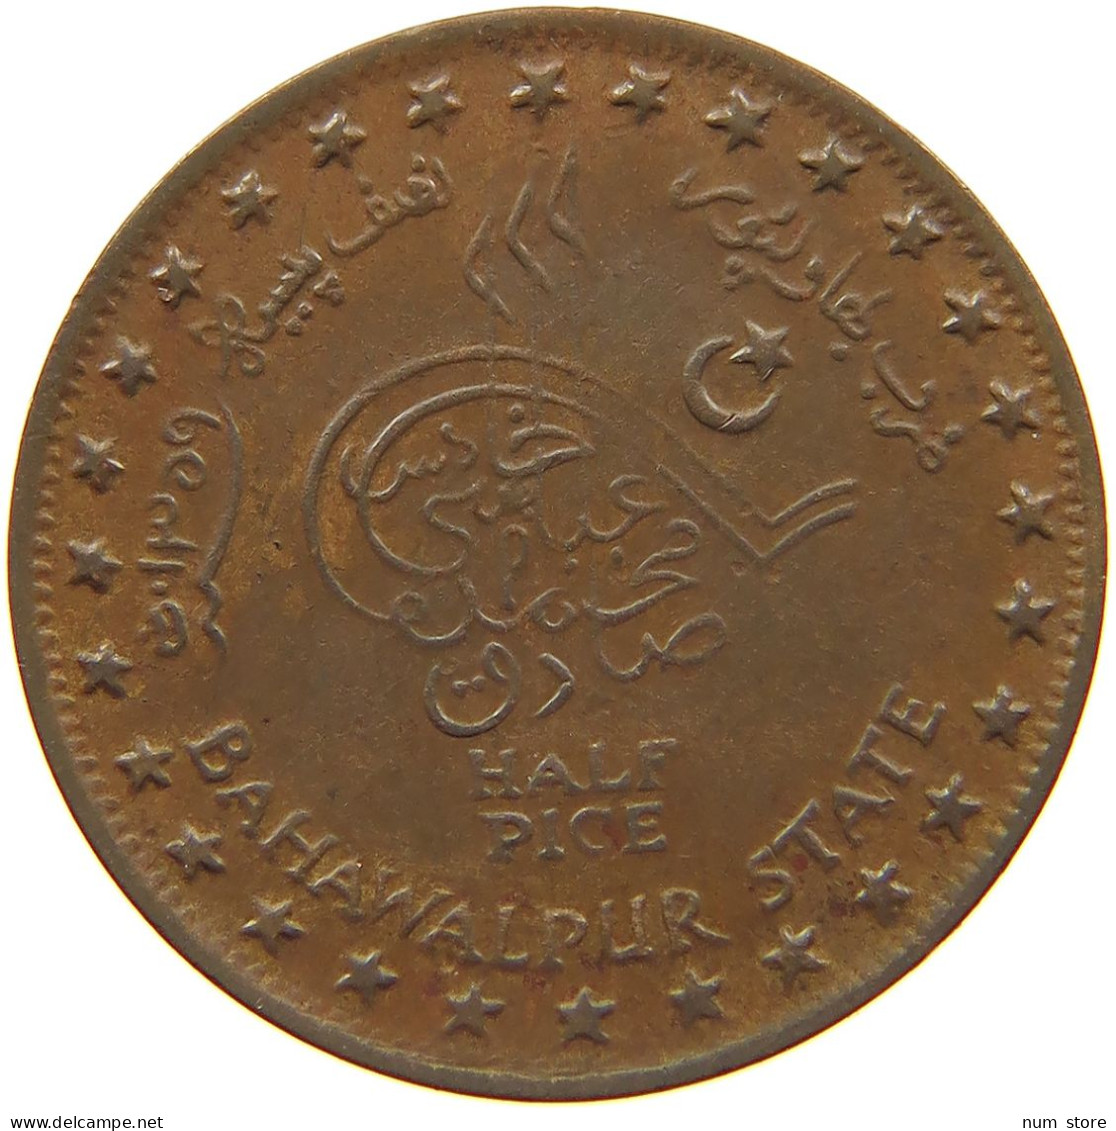 INDIA PRINCELY STATES 1/2 PICE 1940 BAHAWALPUR #s084 0499 - Inde